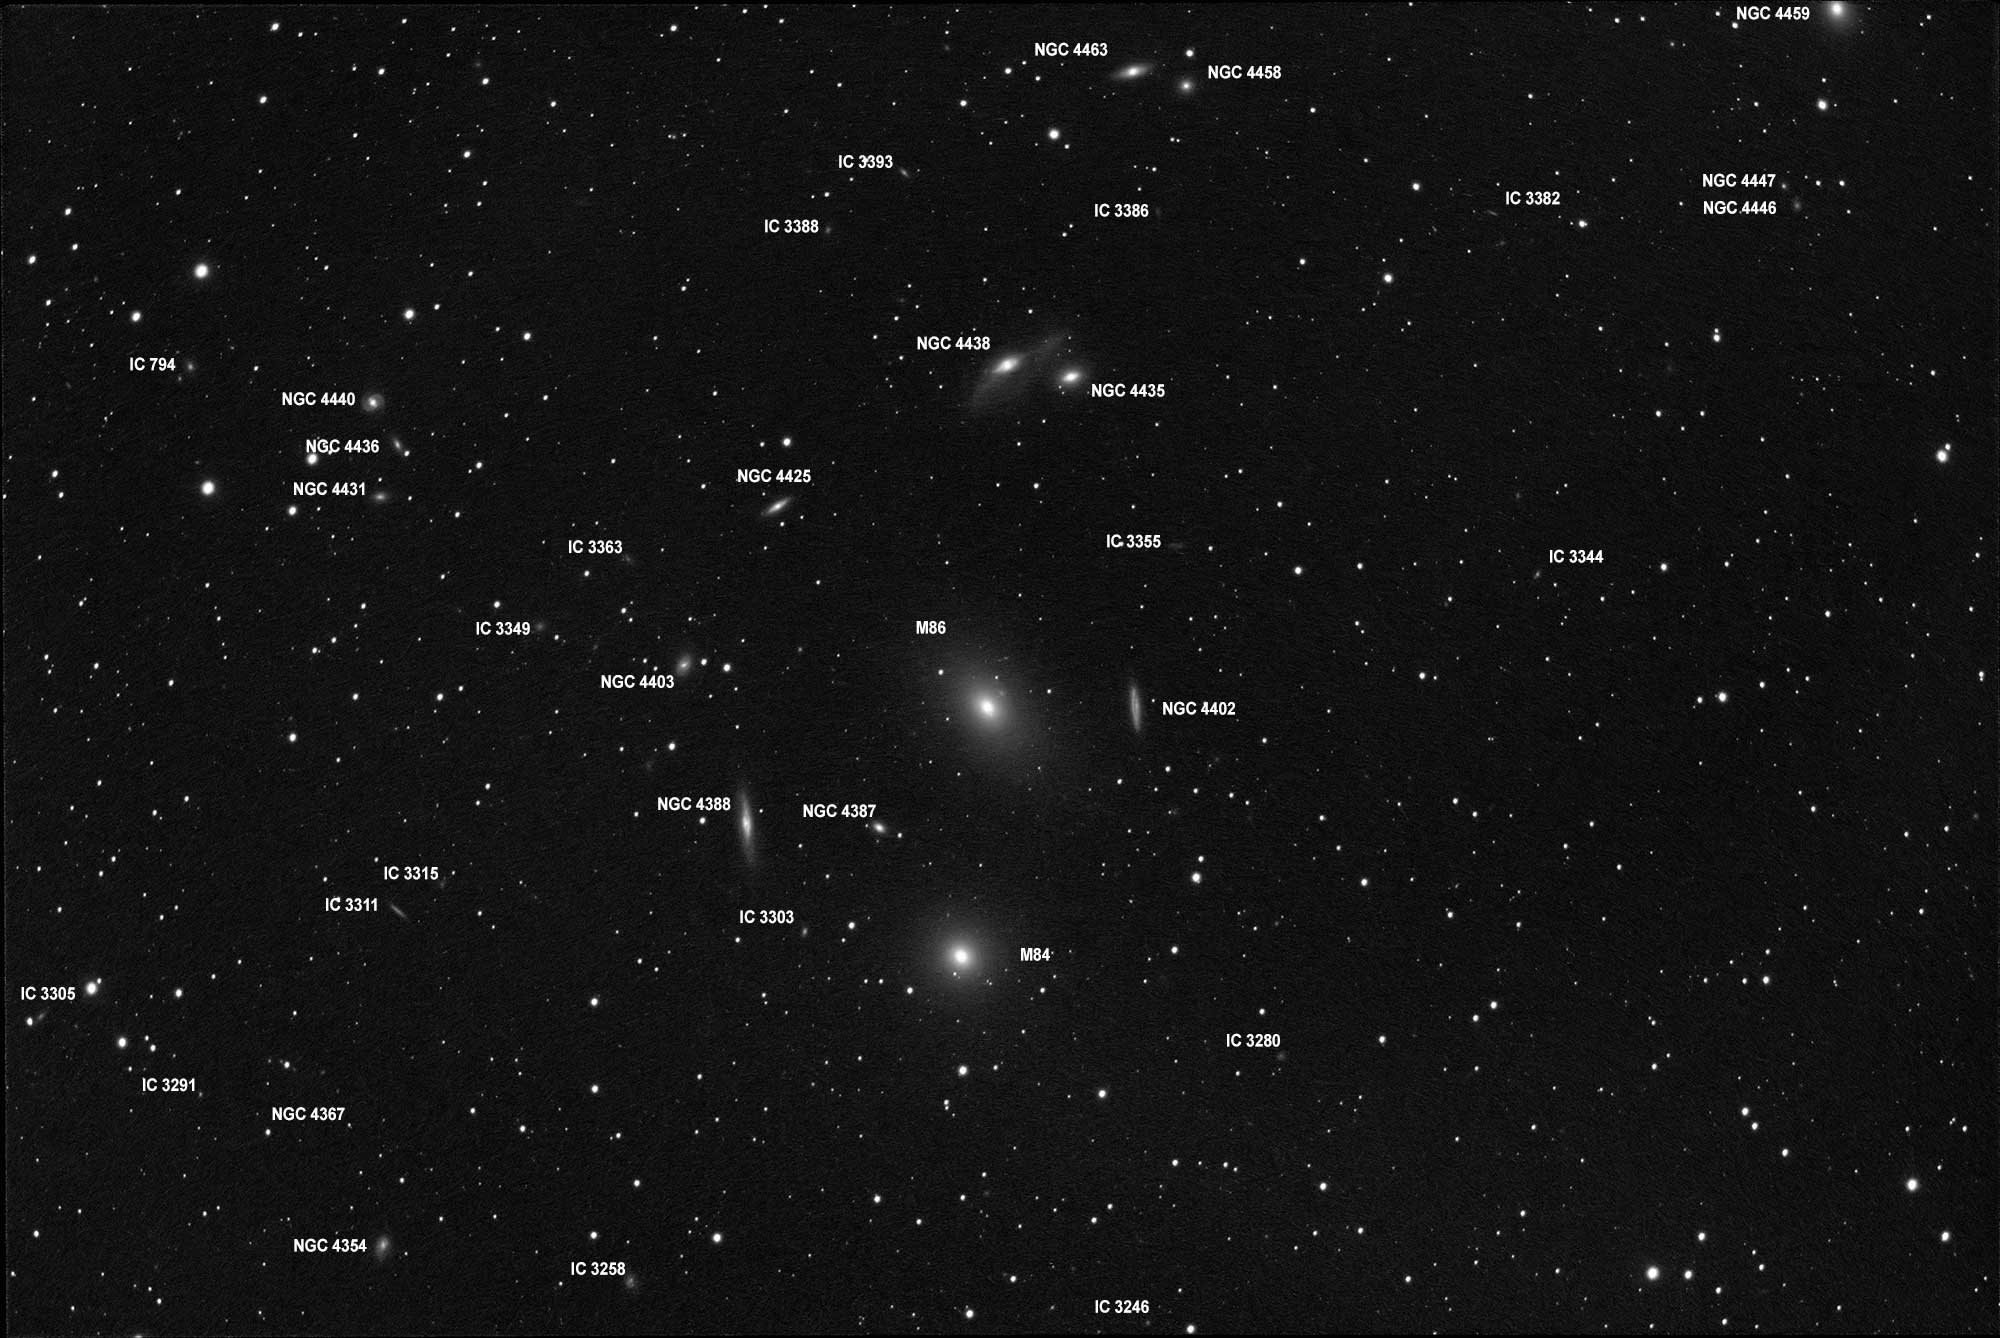 Markarian's Chain William Optics GT71 and ASI183MM Pro